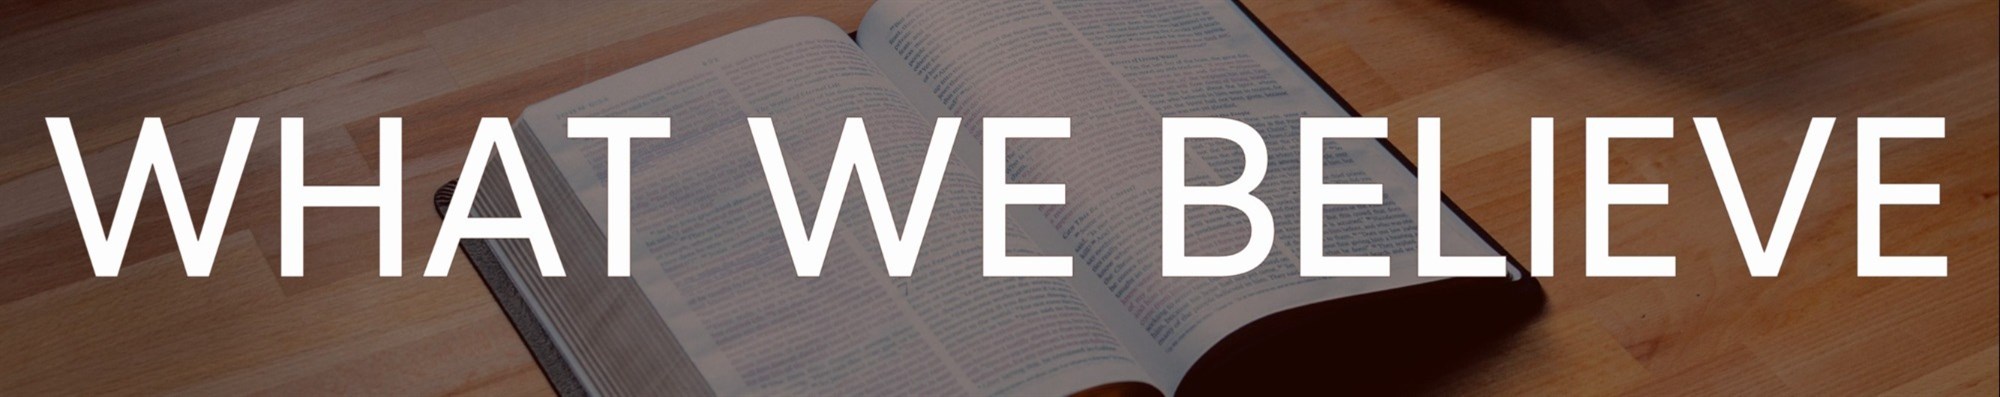 What We Believe Page Banner